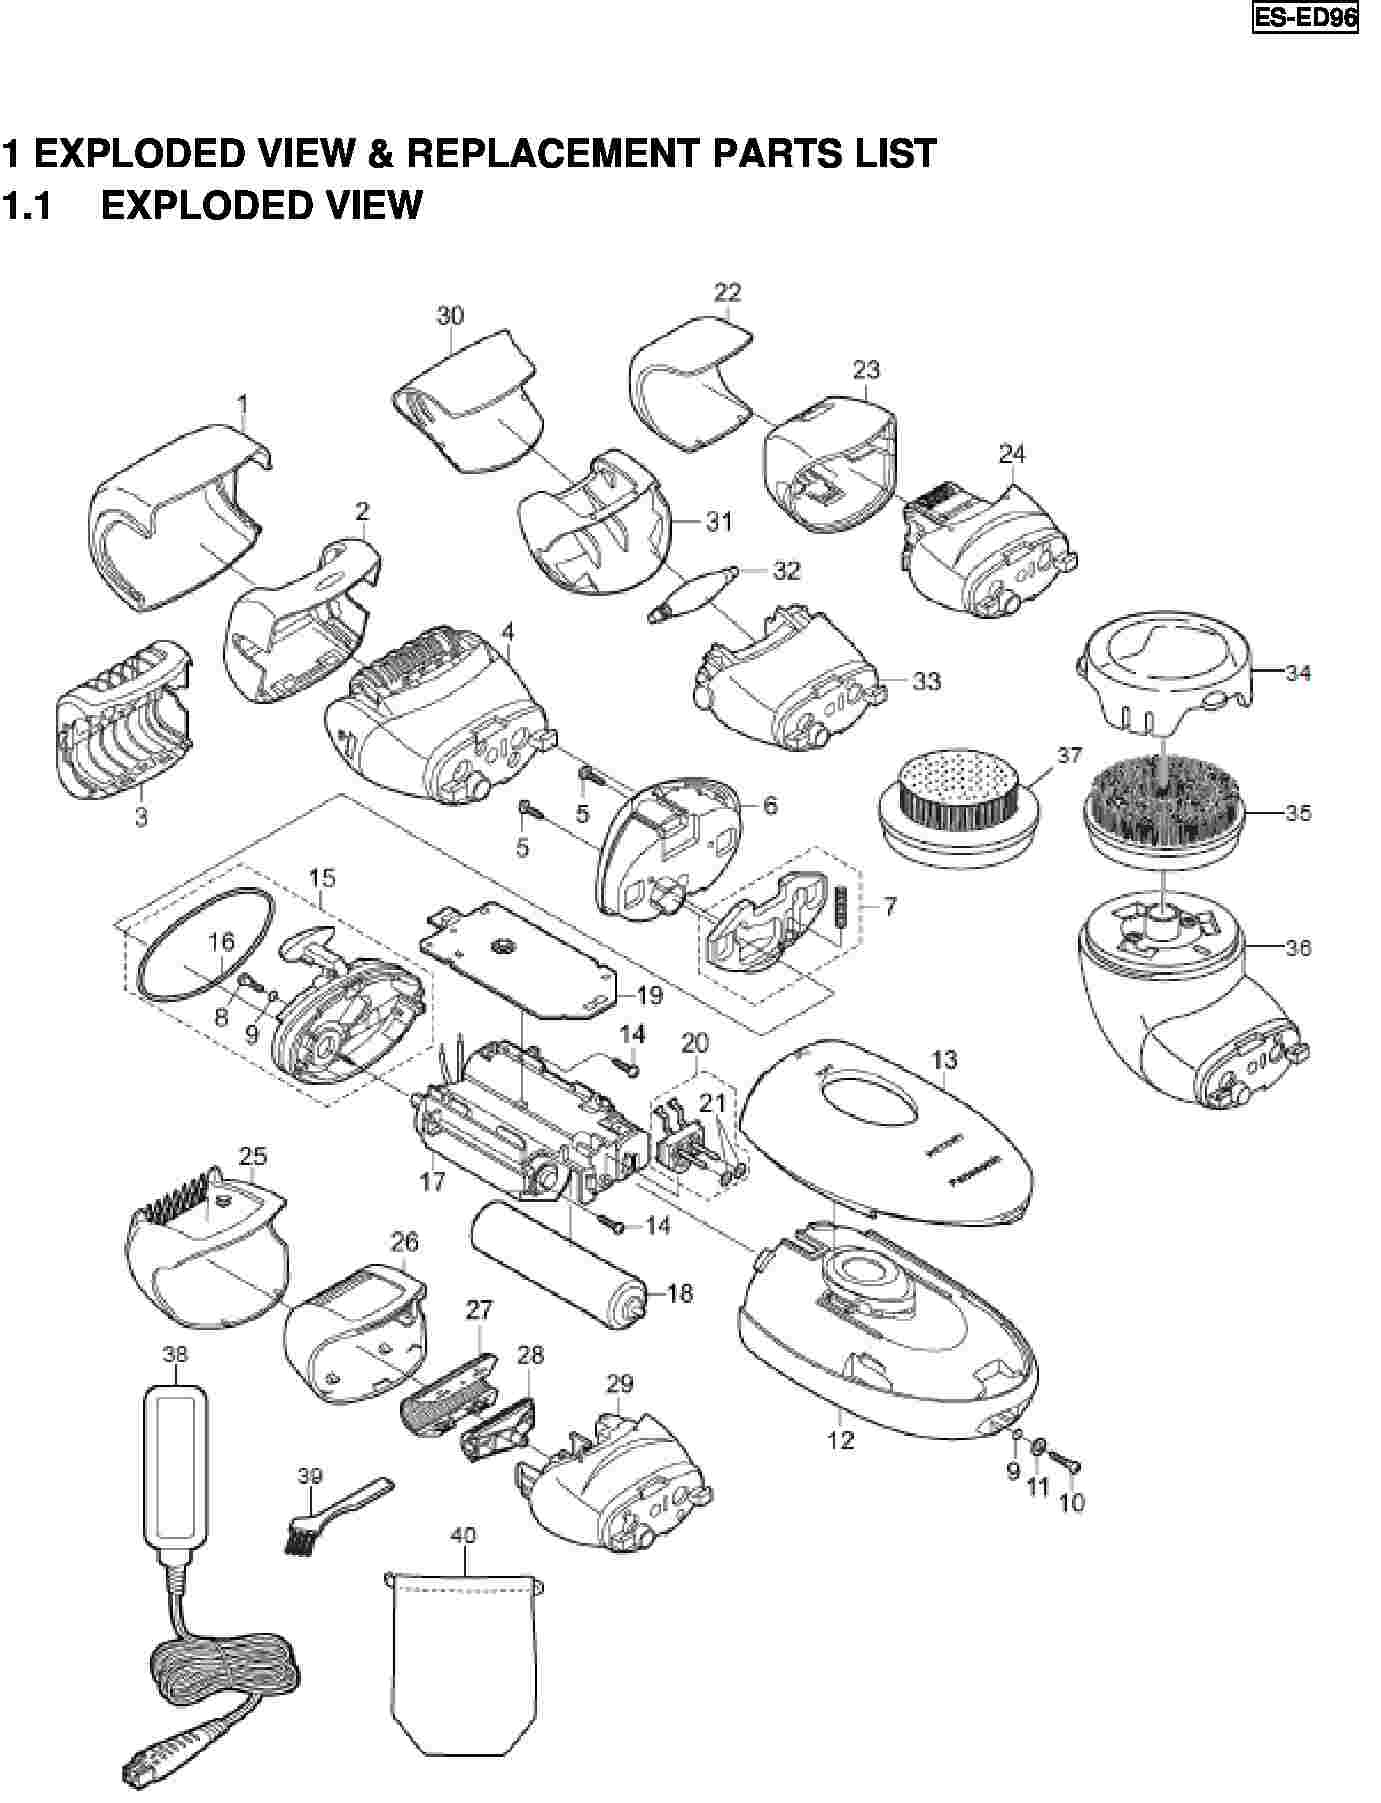 ES-ED96: Exploded View